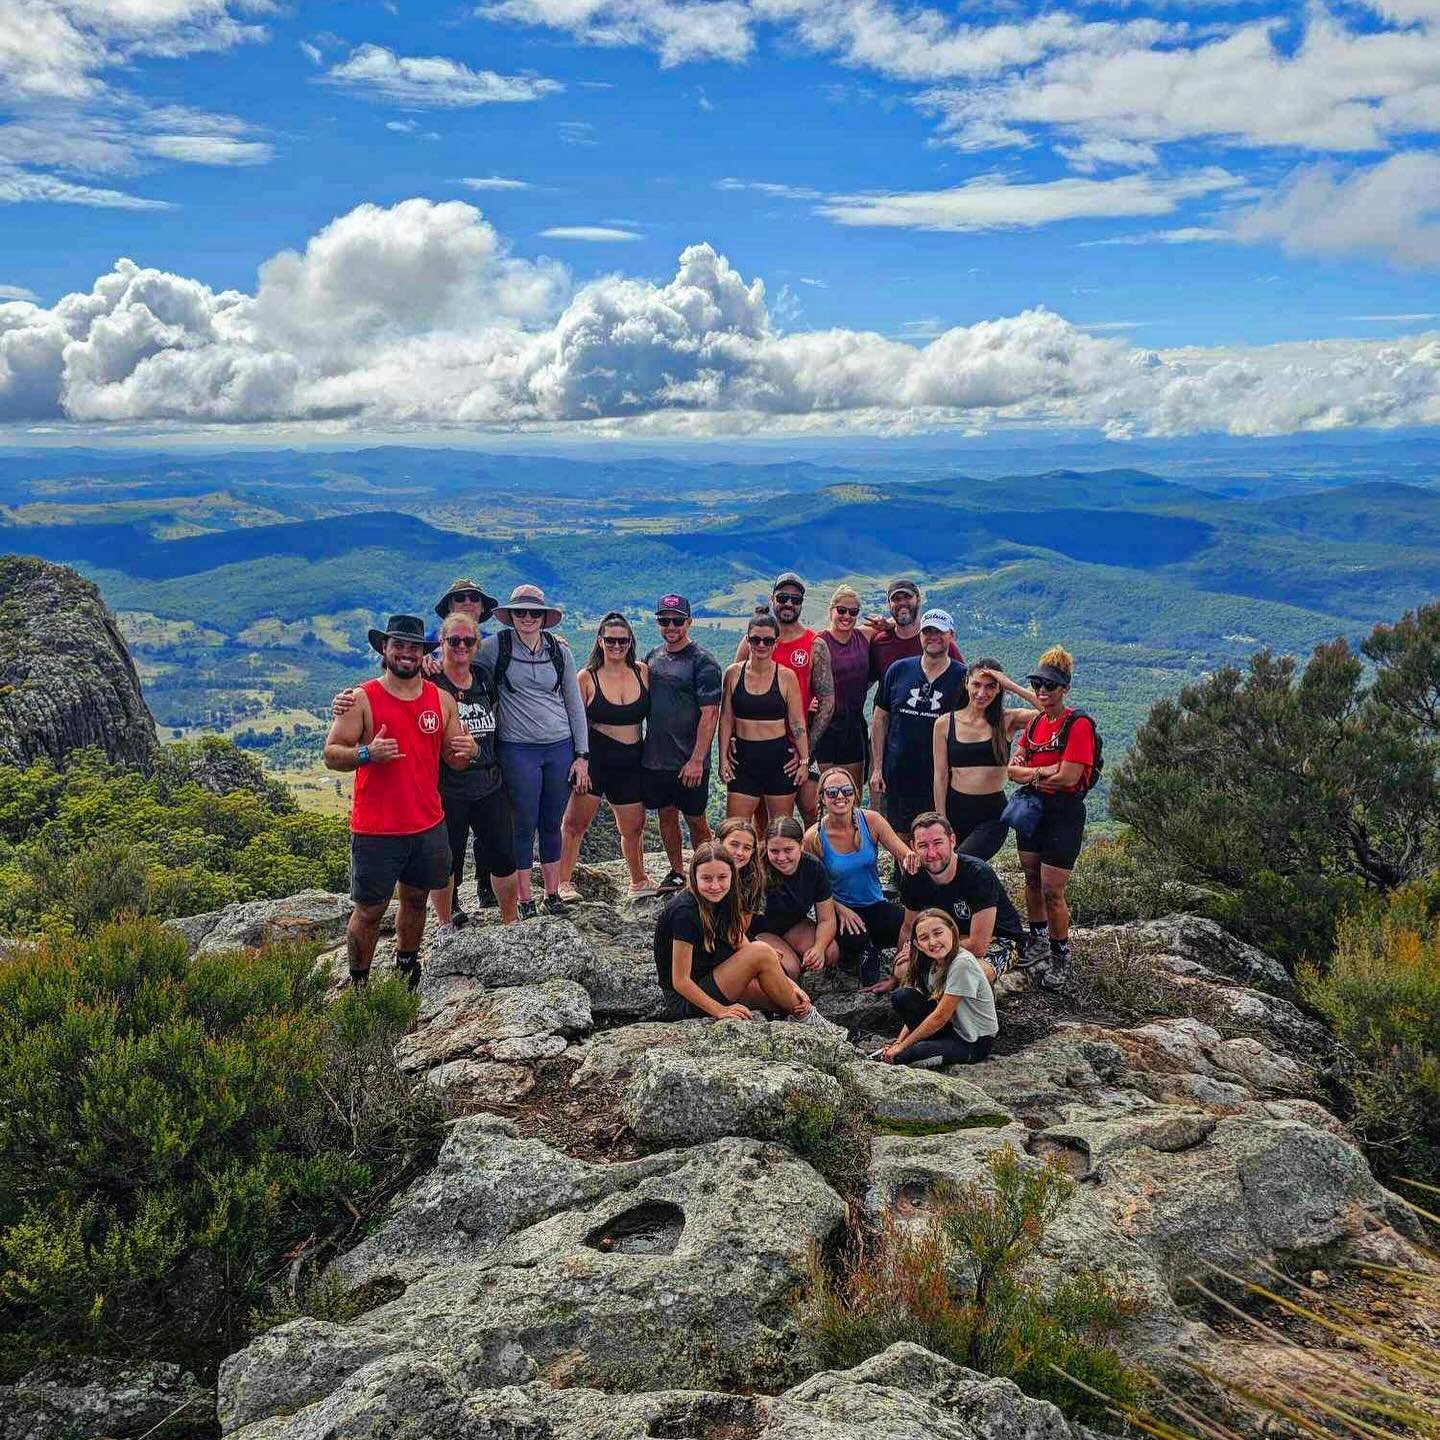 MOUNTAIN CLIMB SQUAD! ⛰️ 💪🏽🔥 🥾 

EPIC WAY TO START OUR SUNDAY MORNING!!
These legends conquering this spicy number! 🌶️ 
With steep inclines, rock scrambling and 360 views at the top, this climb has it all and is one epic adventure!! 

Made even 